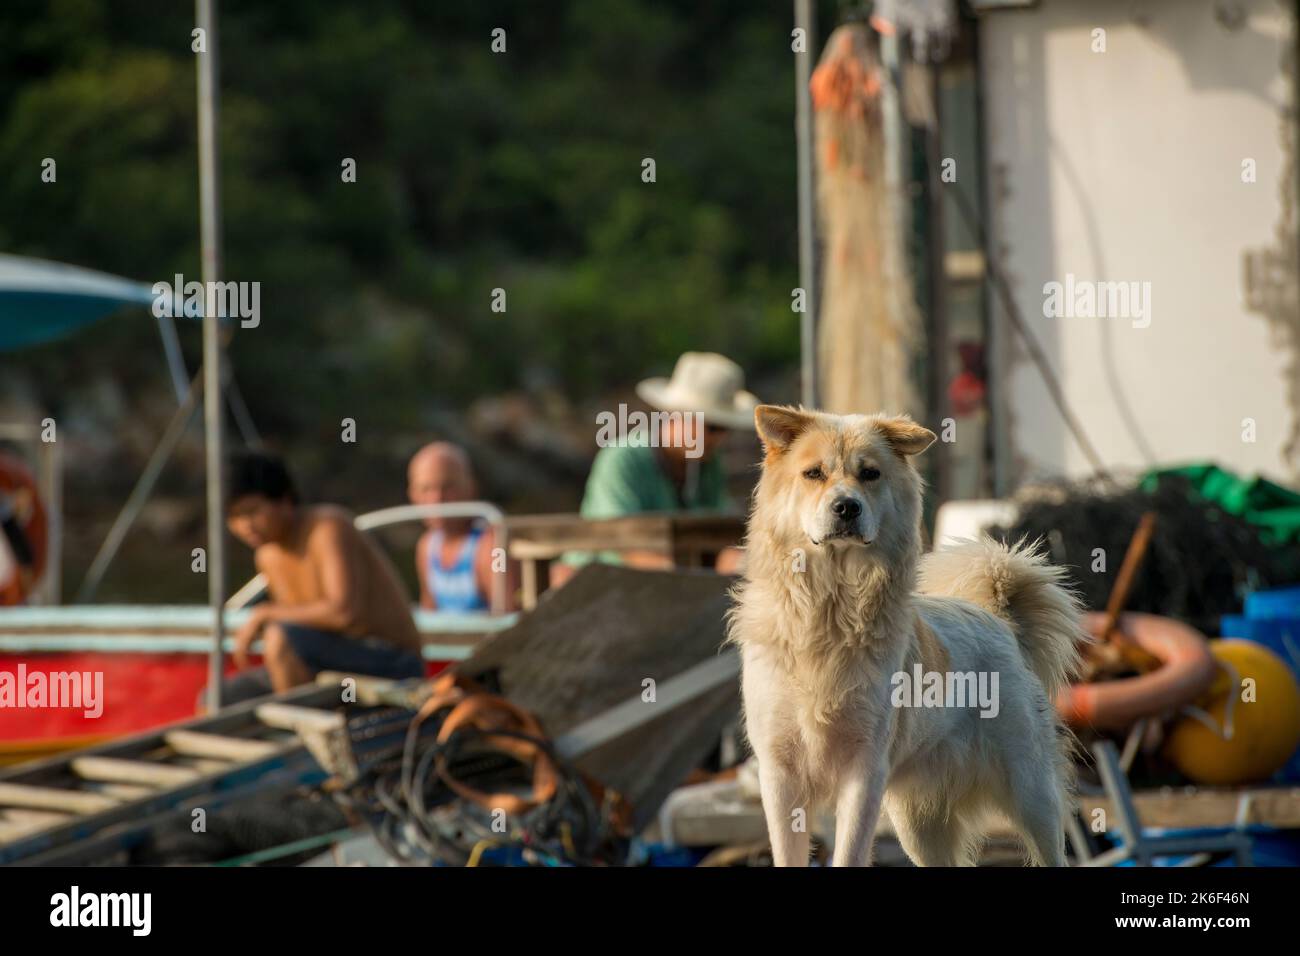 A dog guards the pontoon of a pearl oyster farm in Lo Fu Wat, a small secluded cove on the northern shore of Tolo Channel, New Territories, Hong Kong Stock Photo